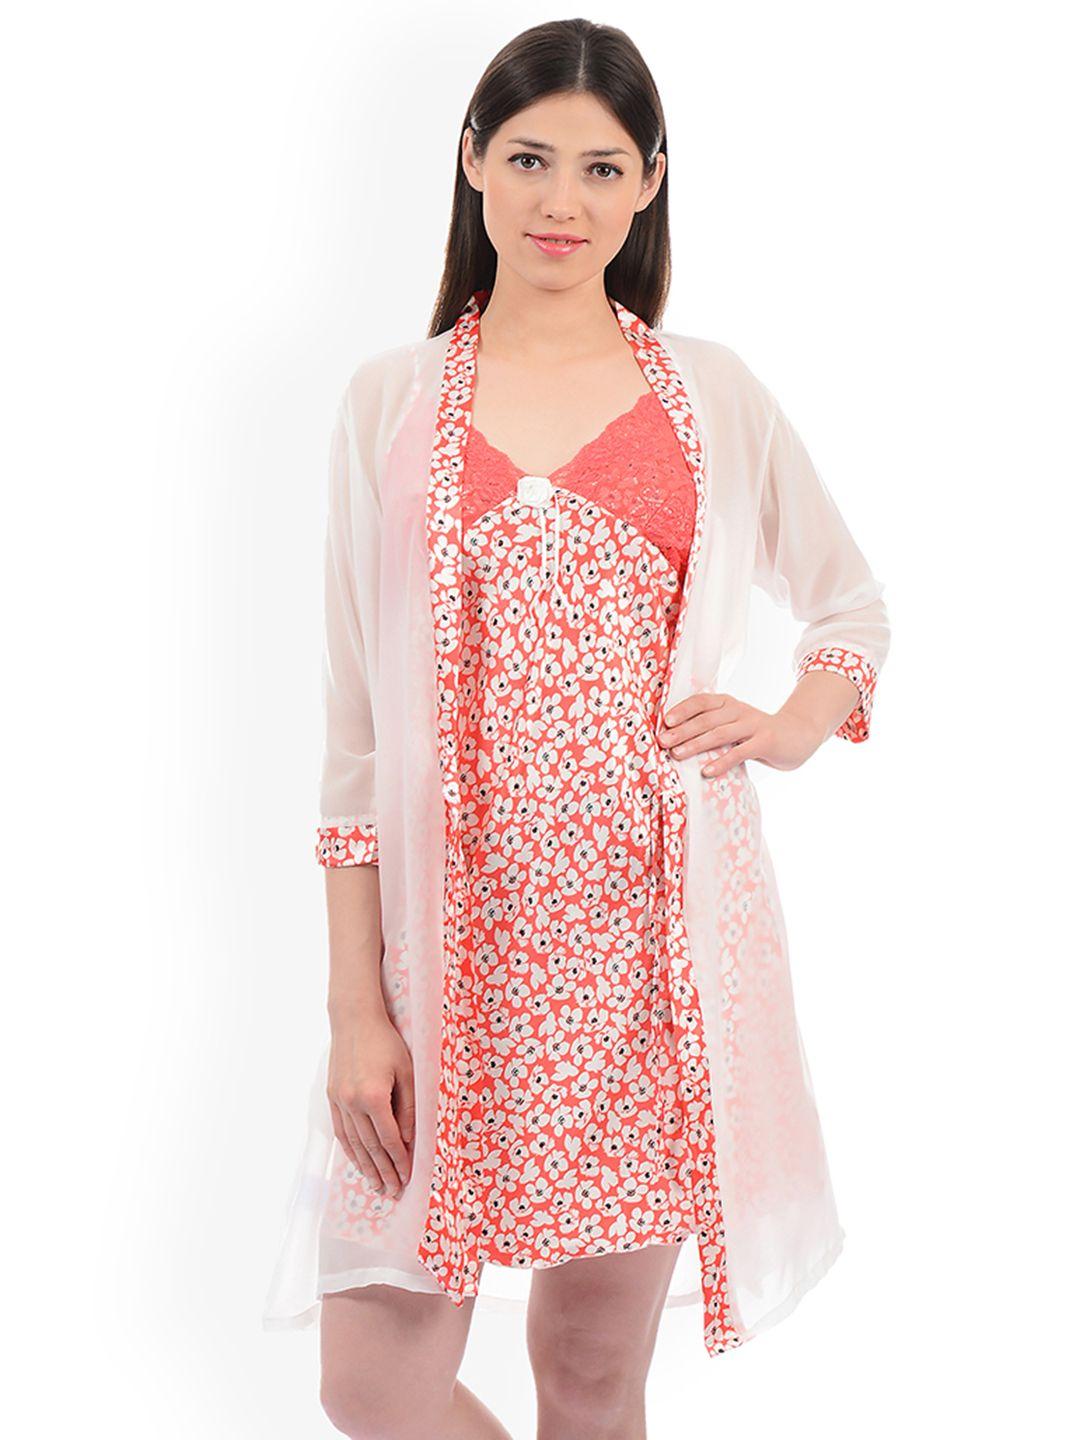 sweet-dreams-women-coral-pink-&-white-floral-print-nightdress-with-sheer-robe